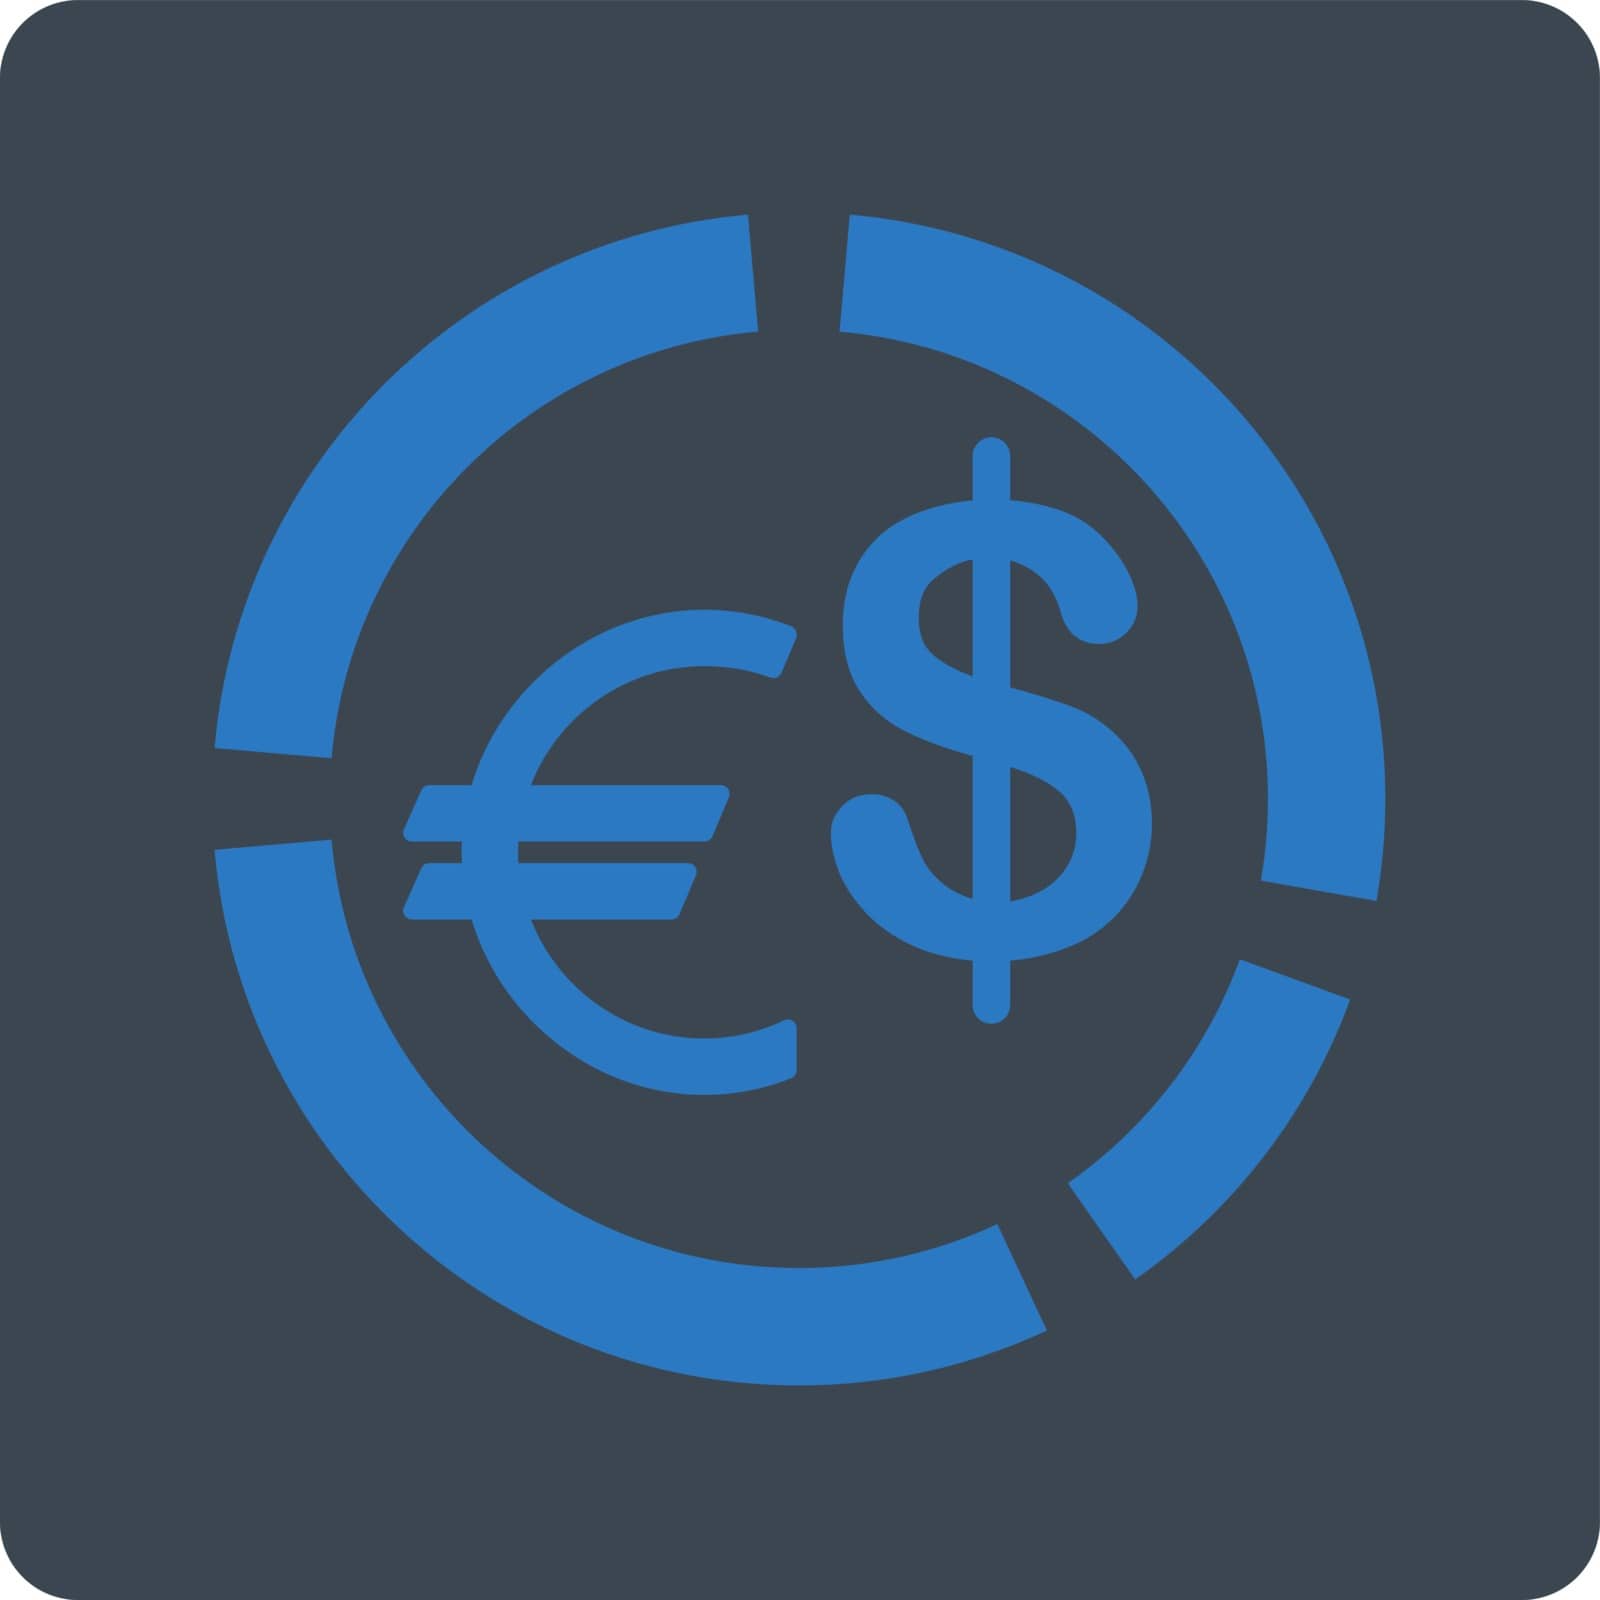 Currency Diagram vector icon. This flat rounded square button uses smooth blue colors and isolated on a white background.